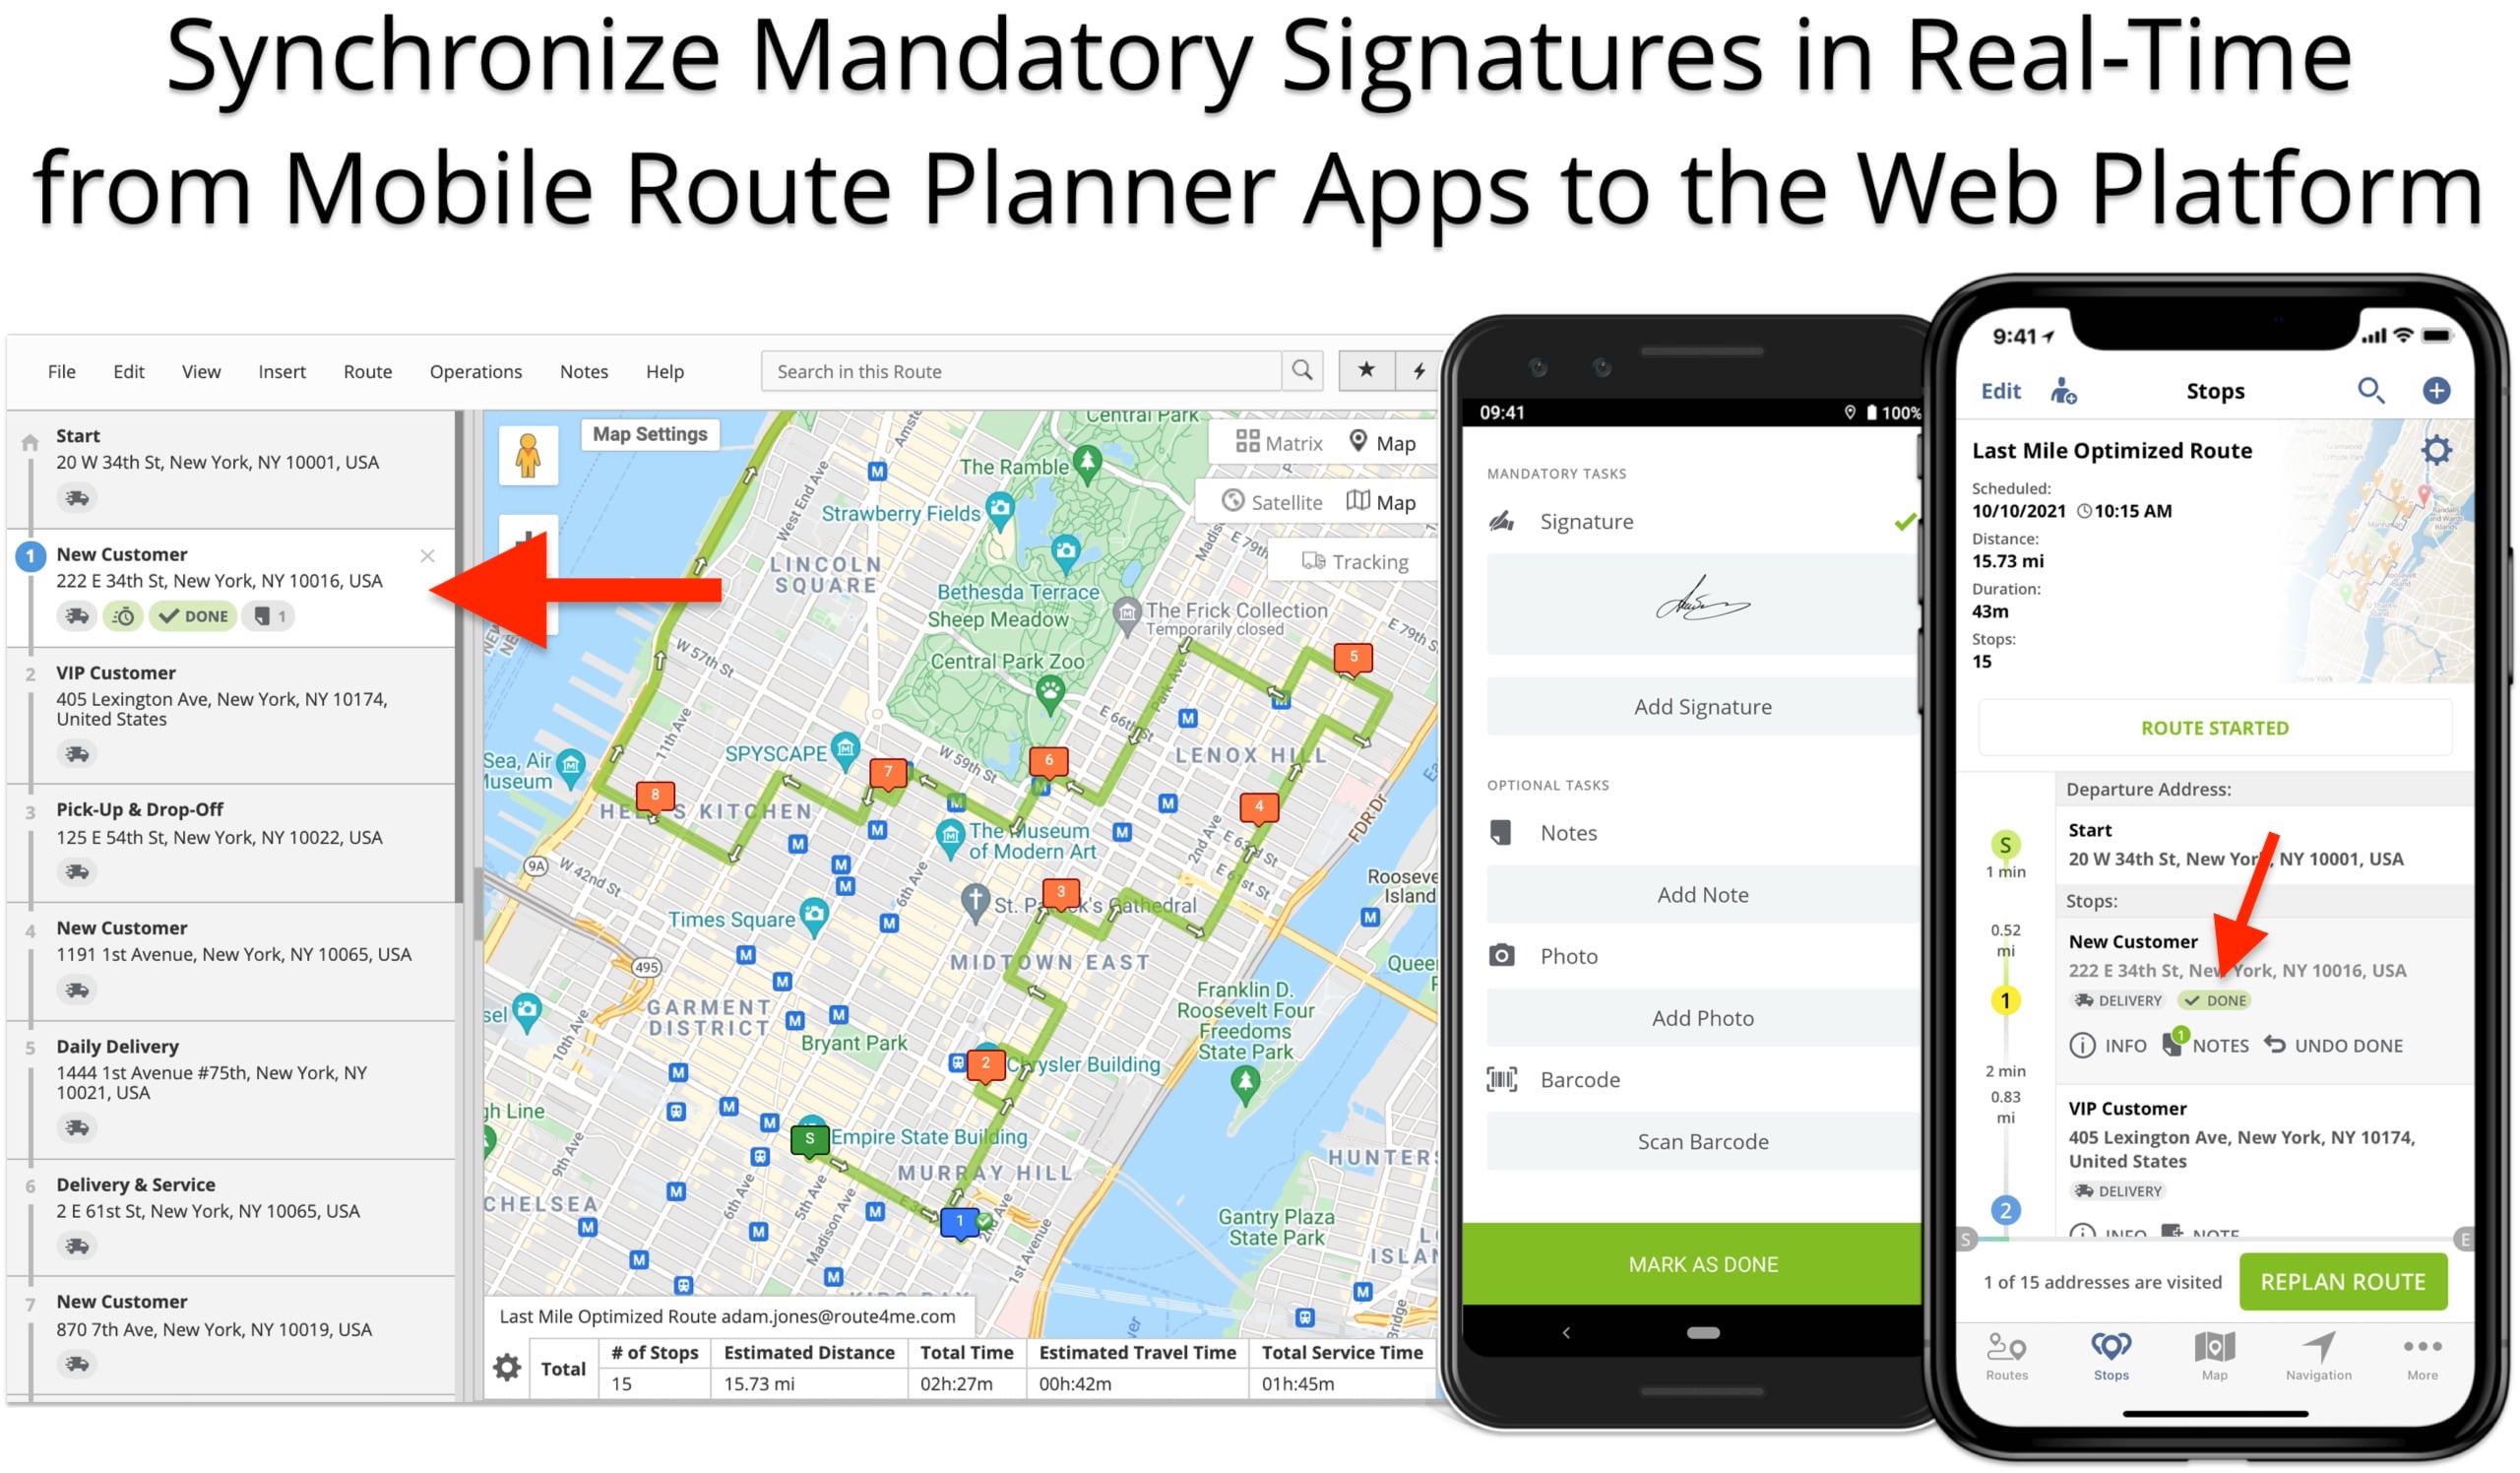 Synchronize mandatory signatures in real-time from mobile route planner apps to the website.